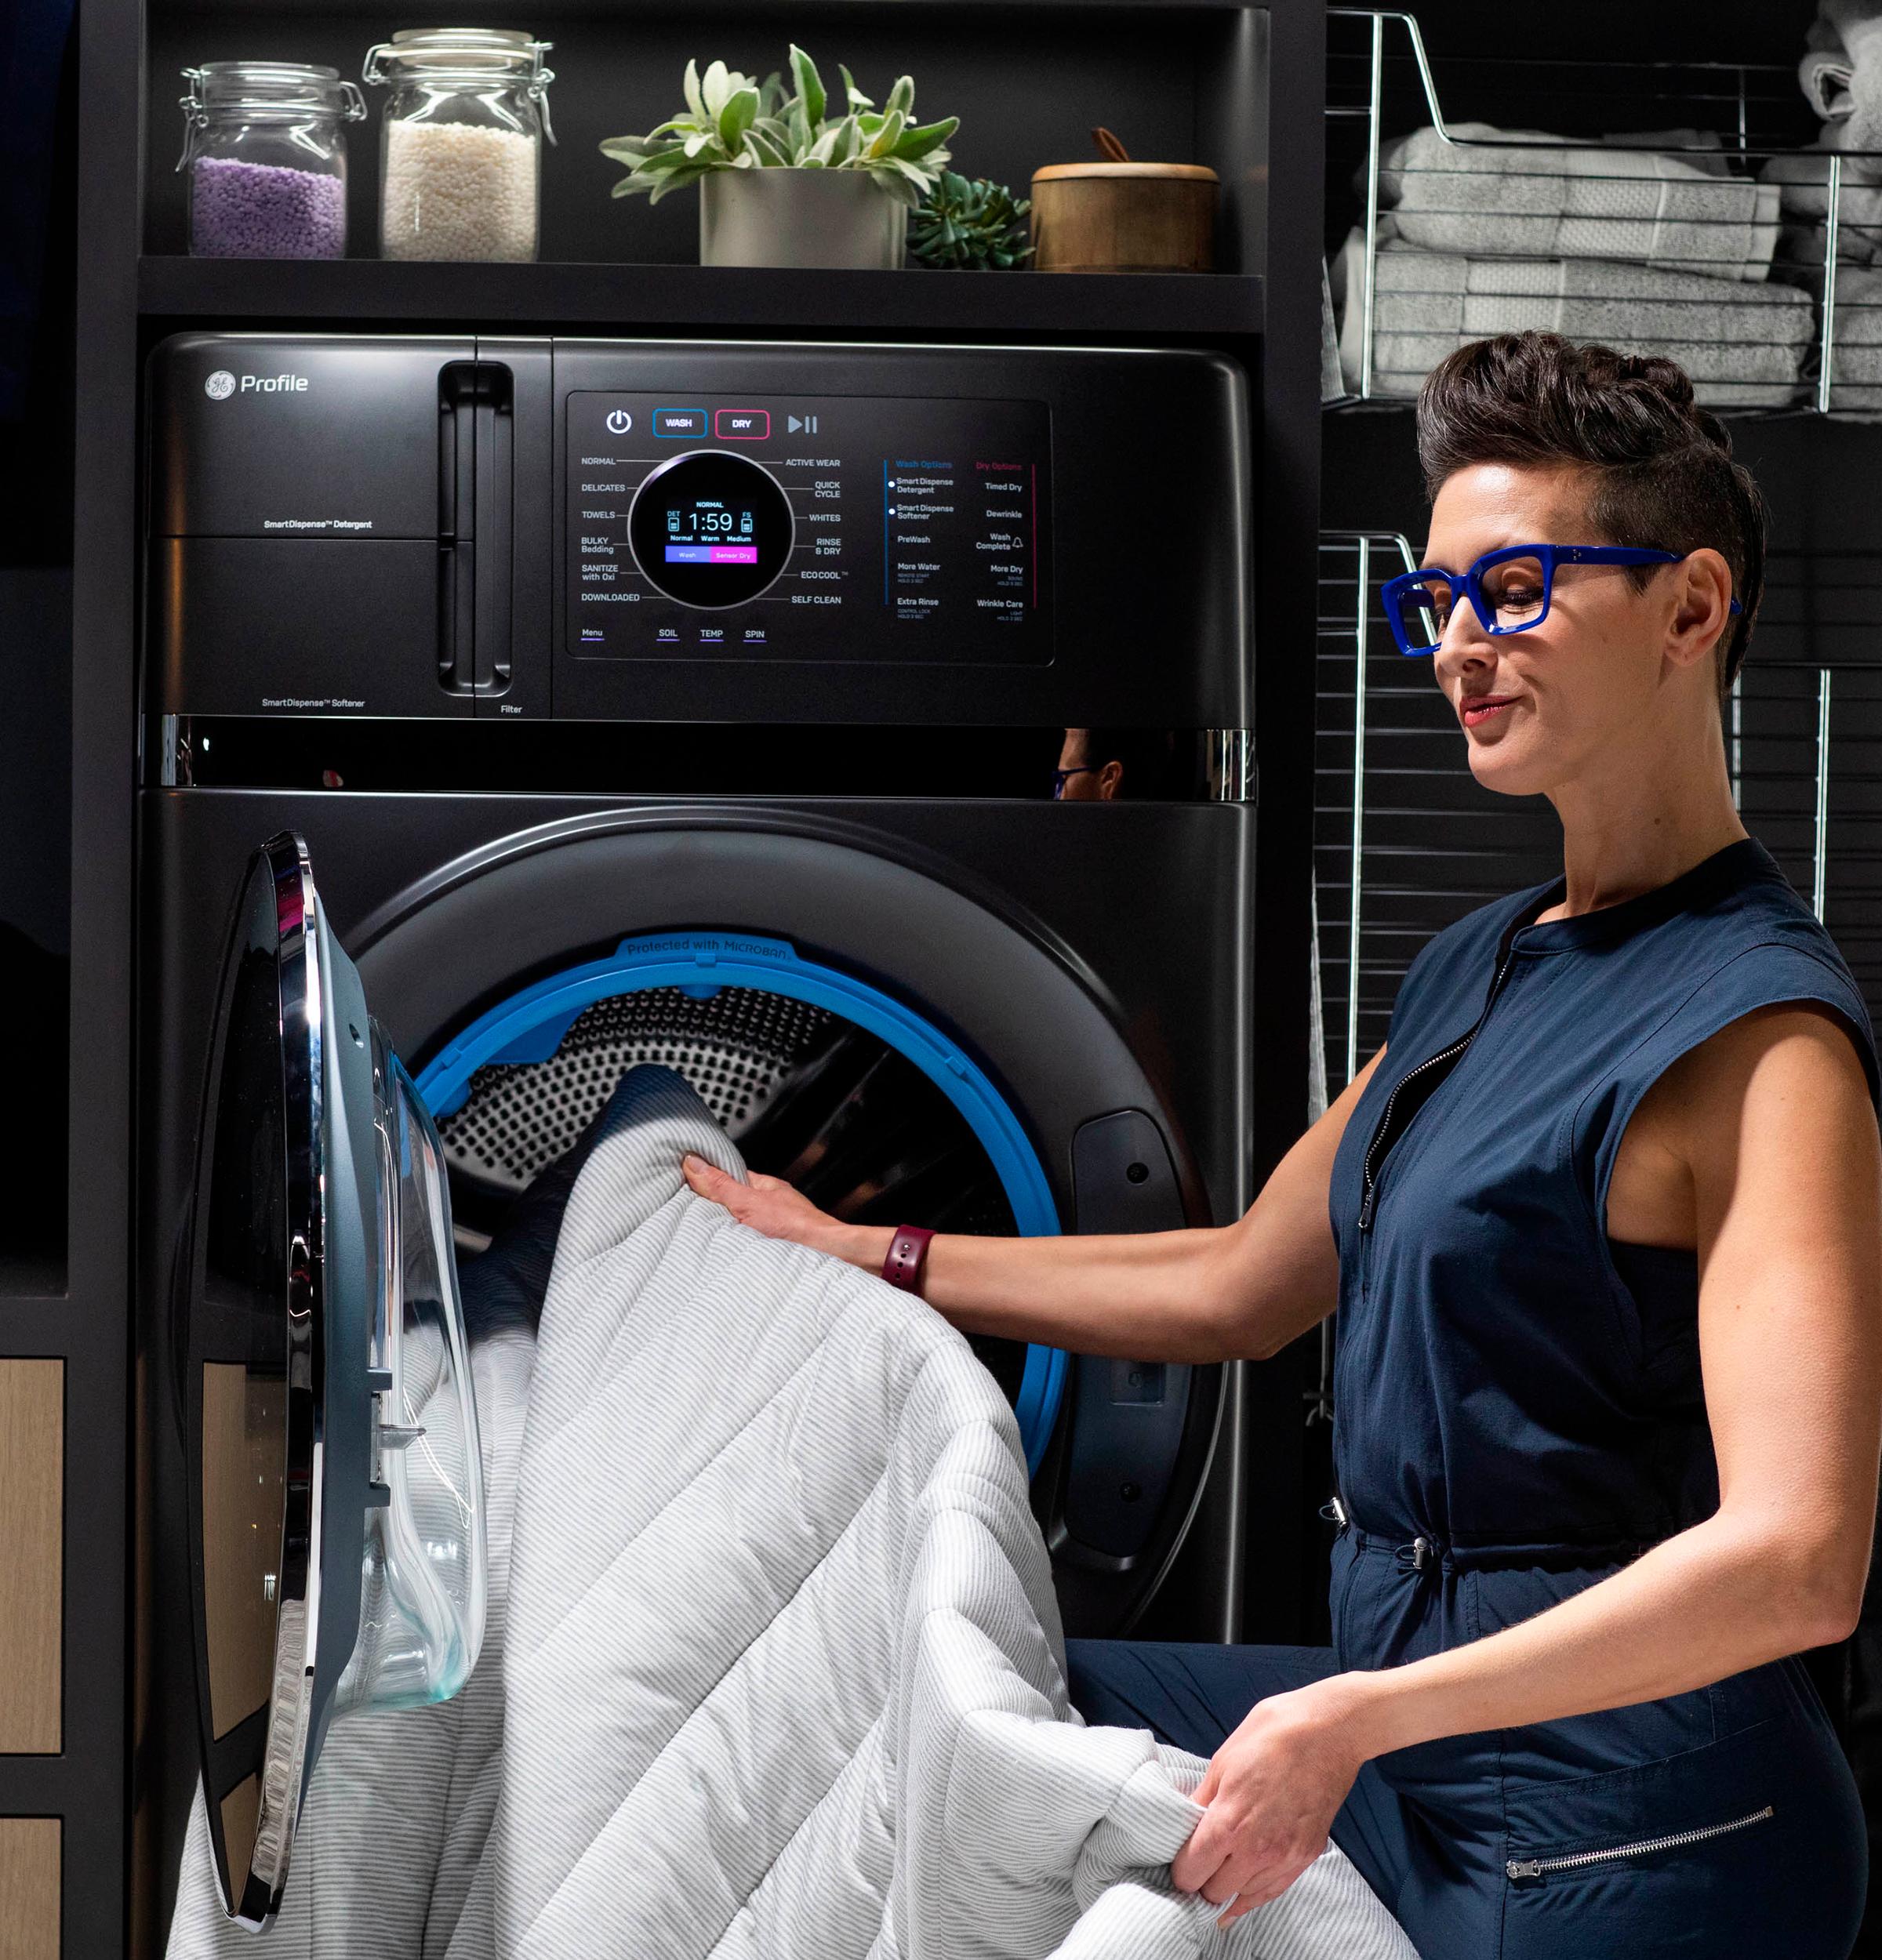 GE Profile™ ENERGY STAR® 4.8 cu. ft. Capacity UltraFast Combo with Ventless Inverter Heat Pump Technology Washer/Dryer